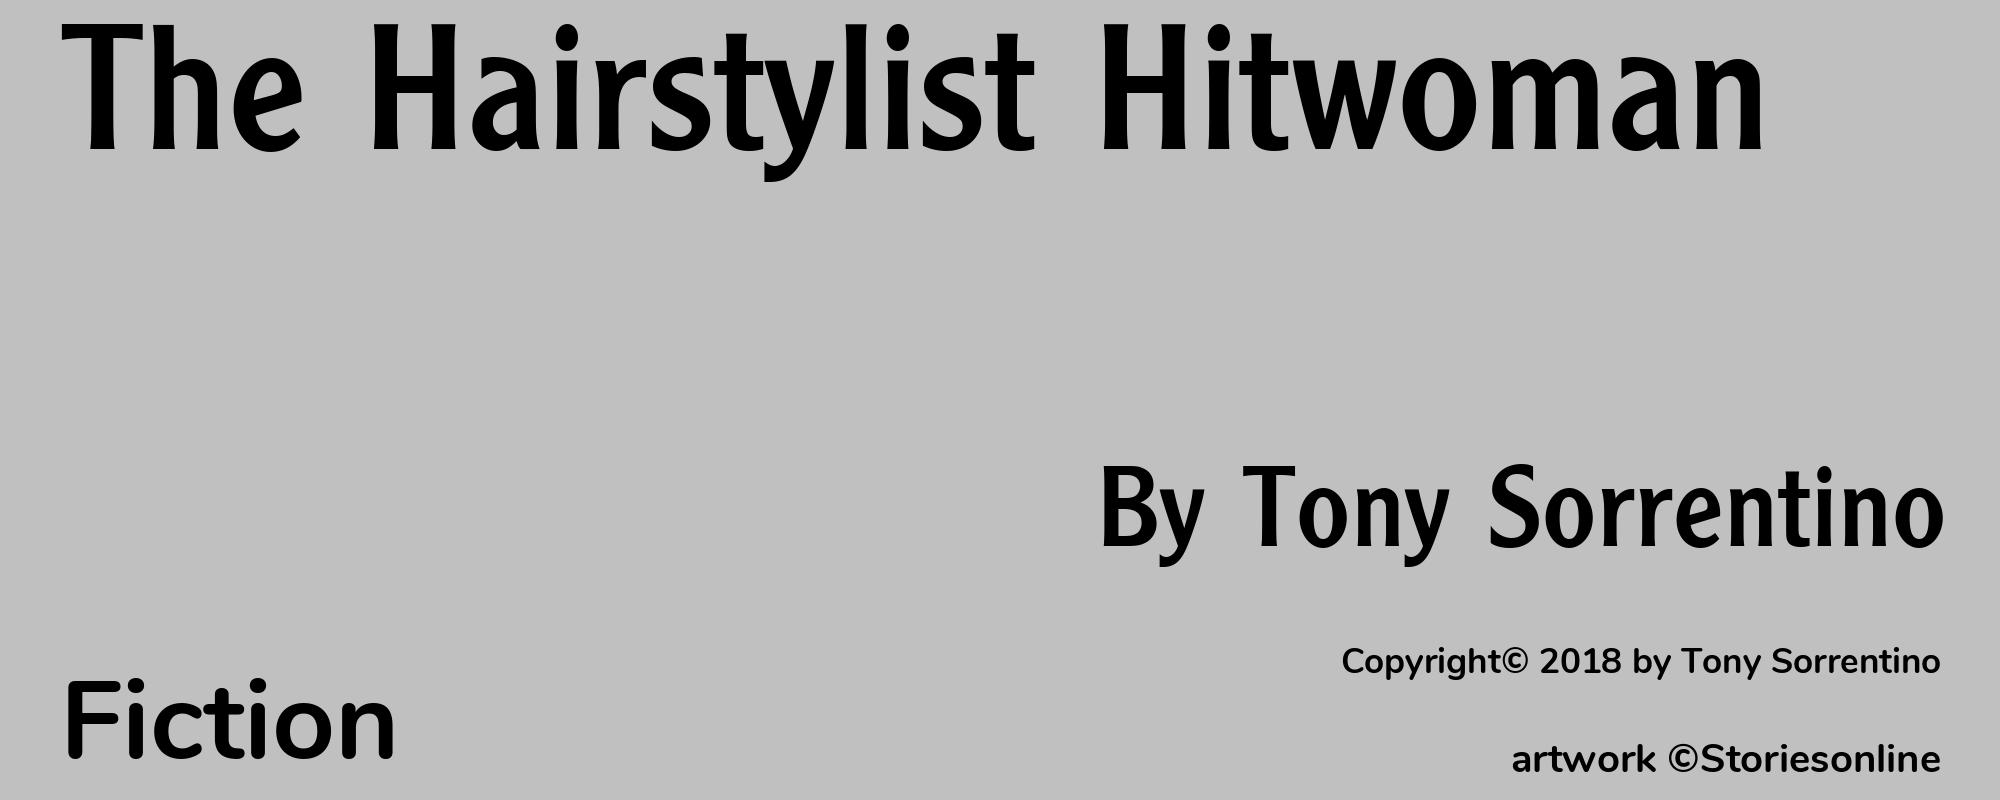 The Hairstylist Hitwoman - Cover